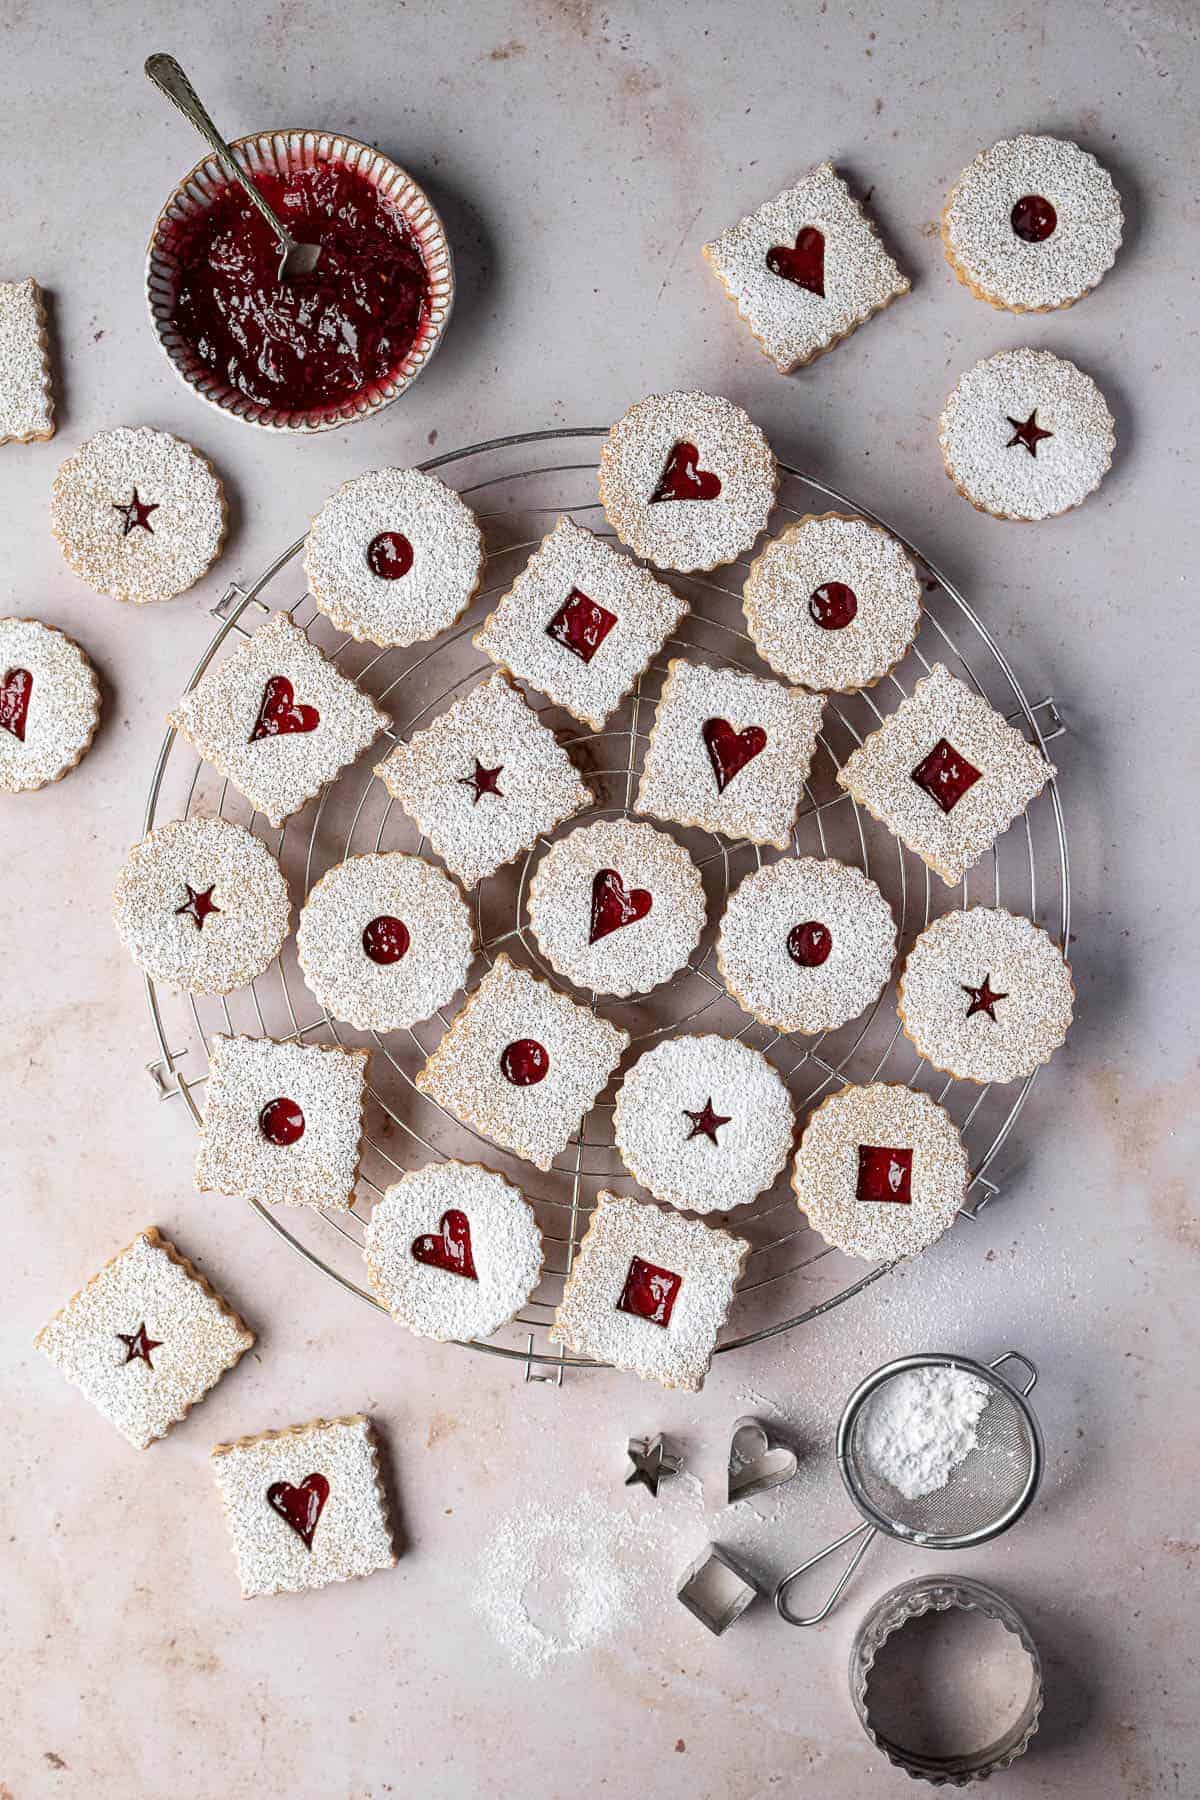 Linzer cookies on round wire cooling rack with jam and cookie cutters off to side